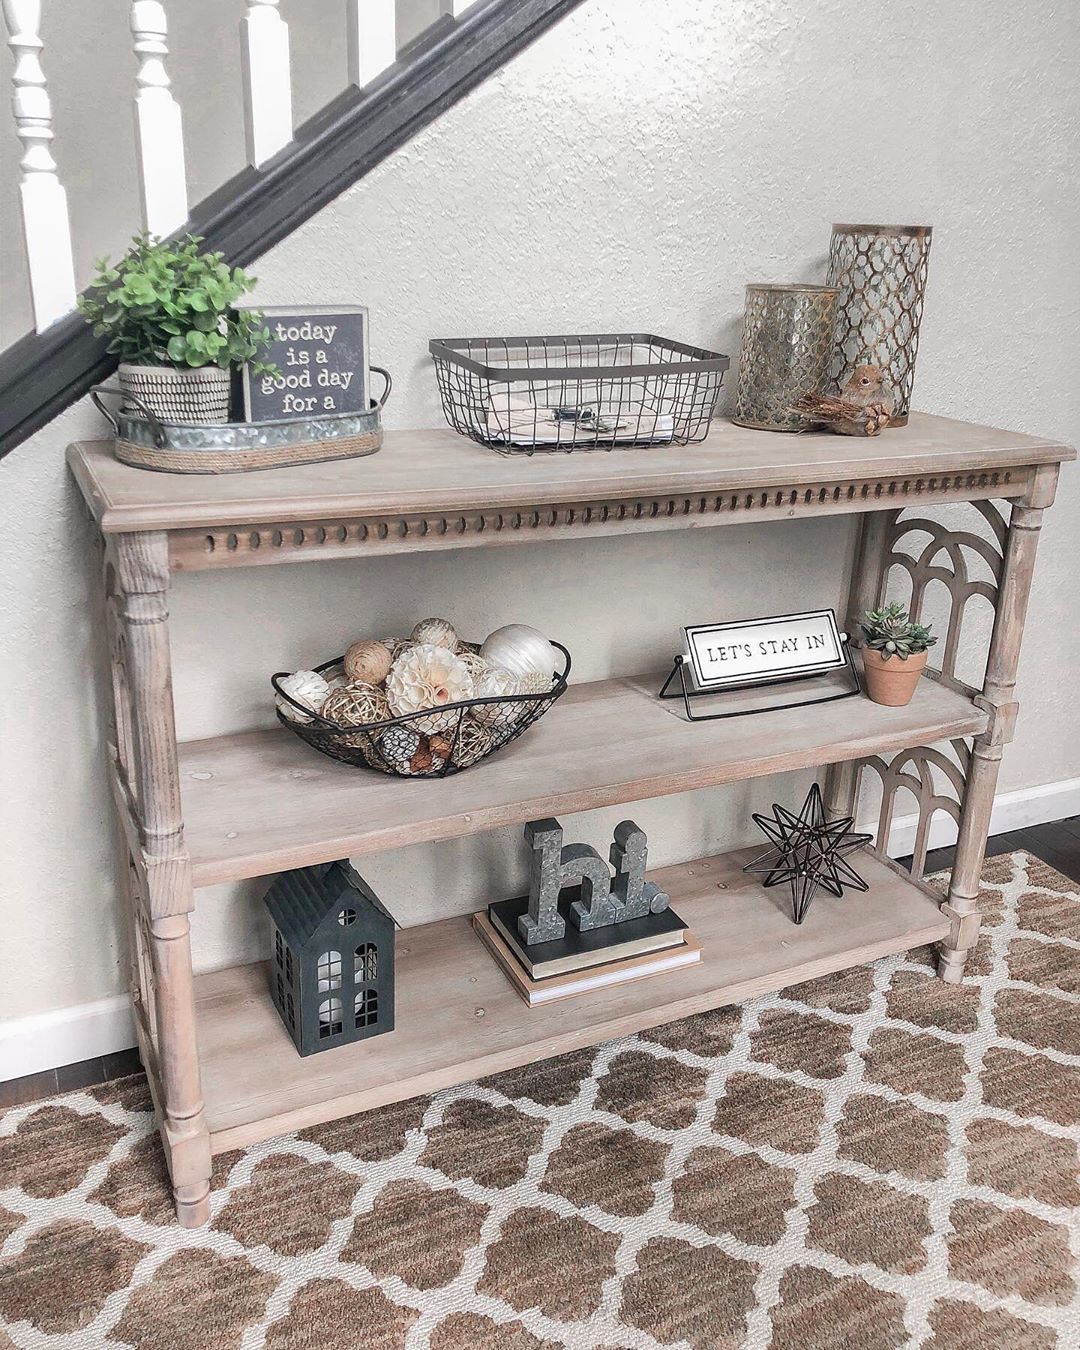 Interior Design This cathedral-inspired console table was made for @homebyhiliary’s entryway!
∙
…